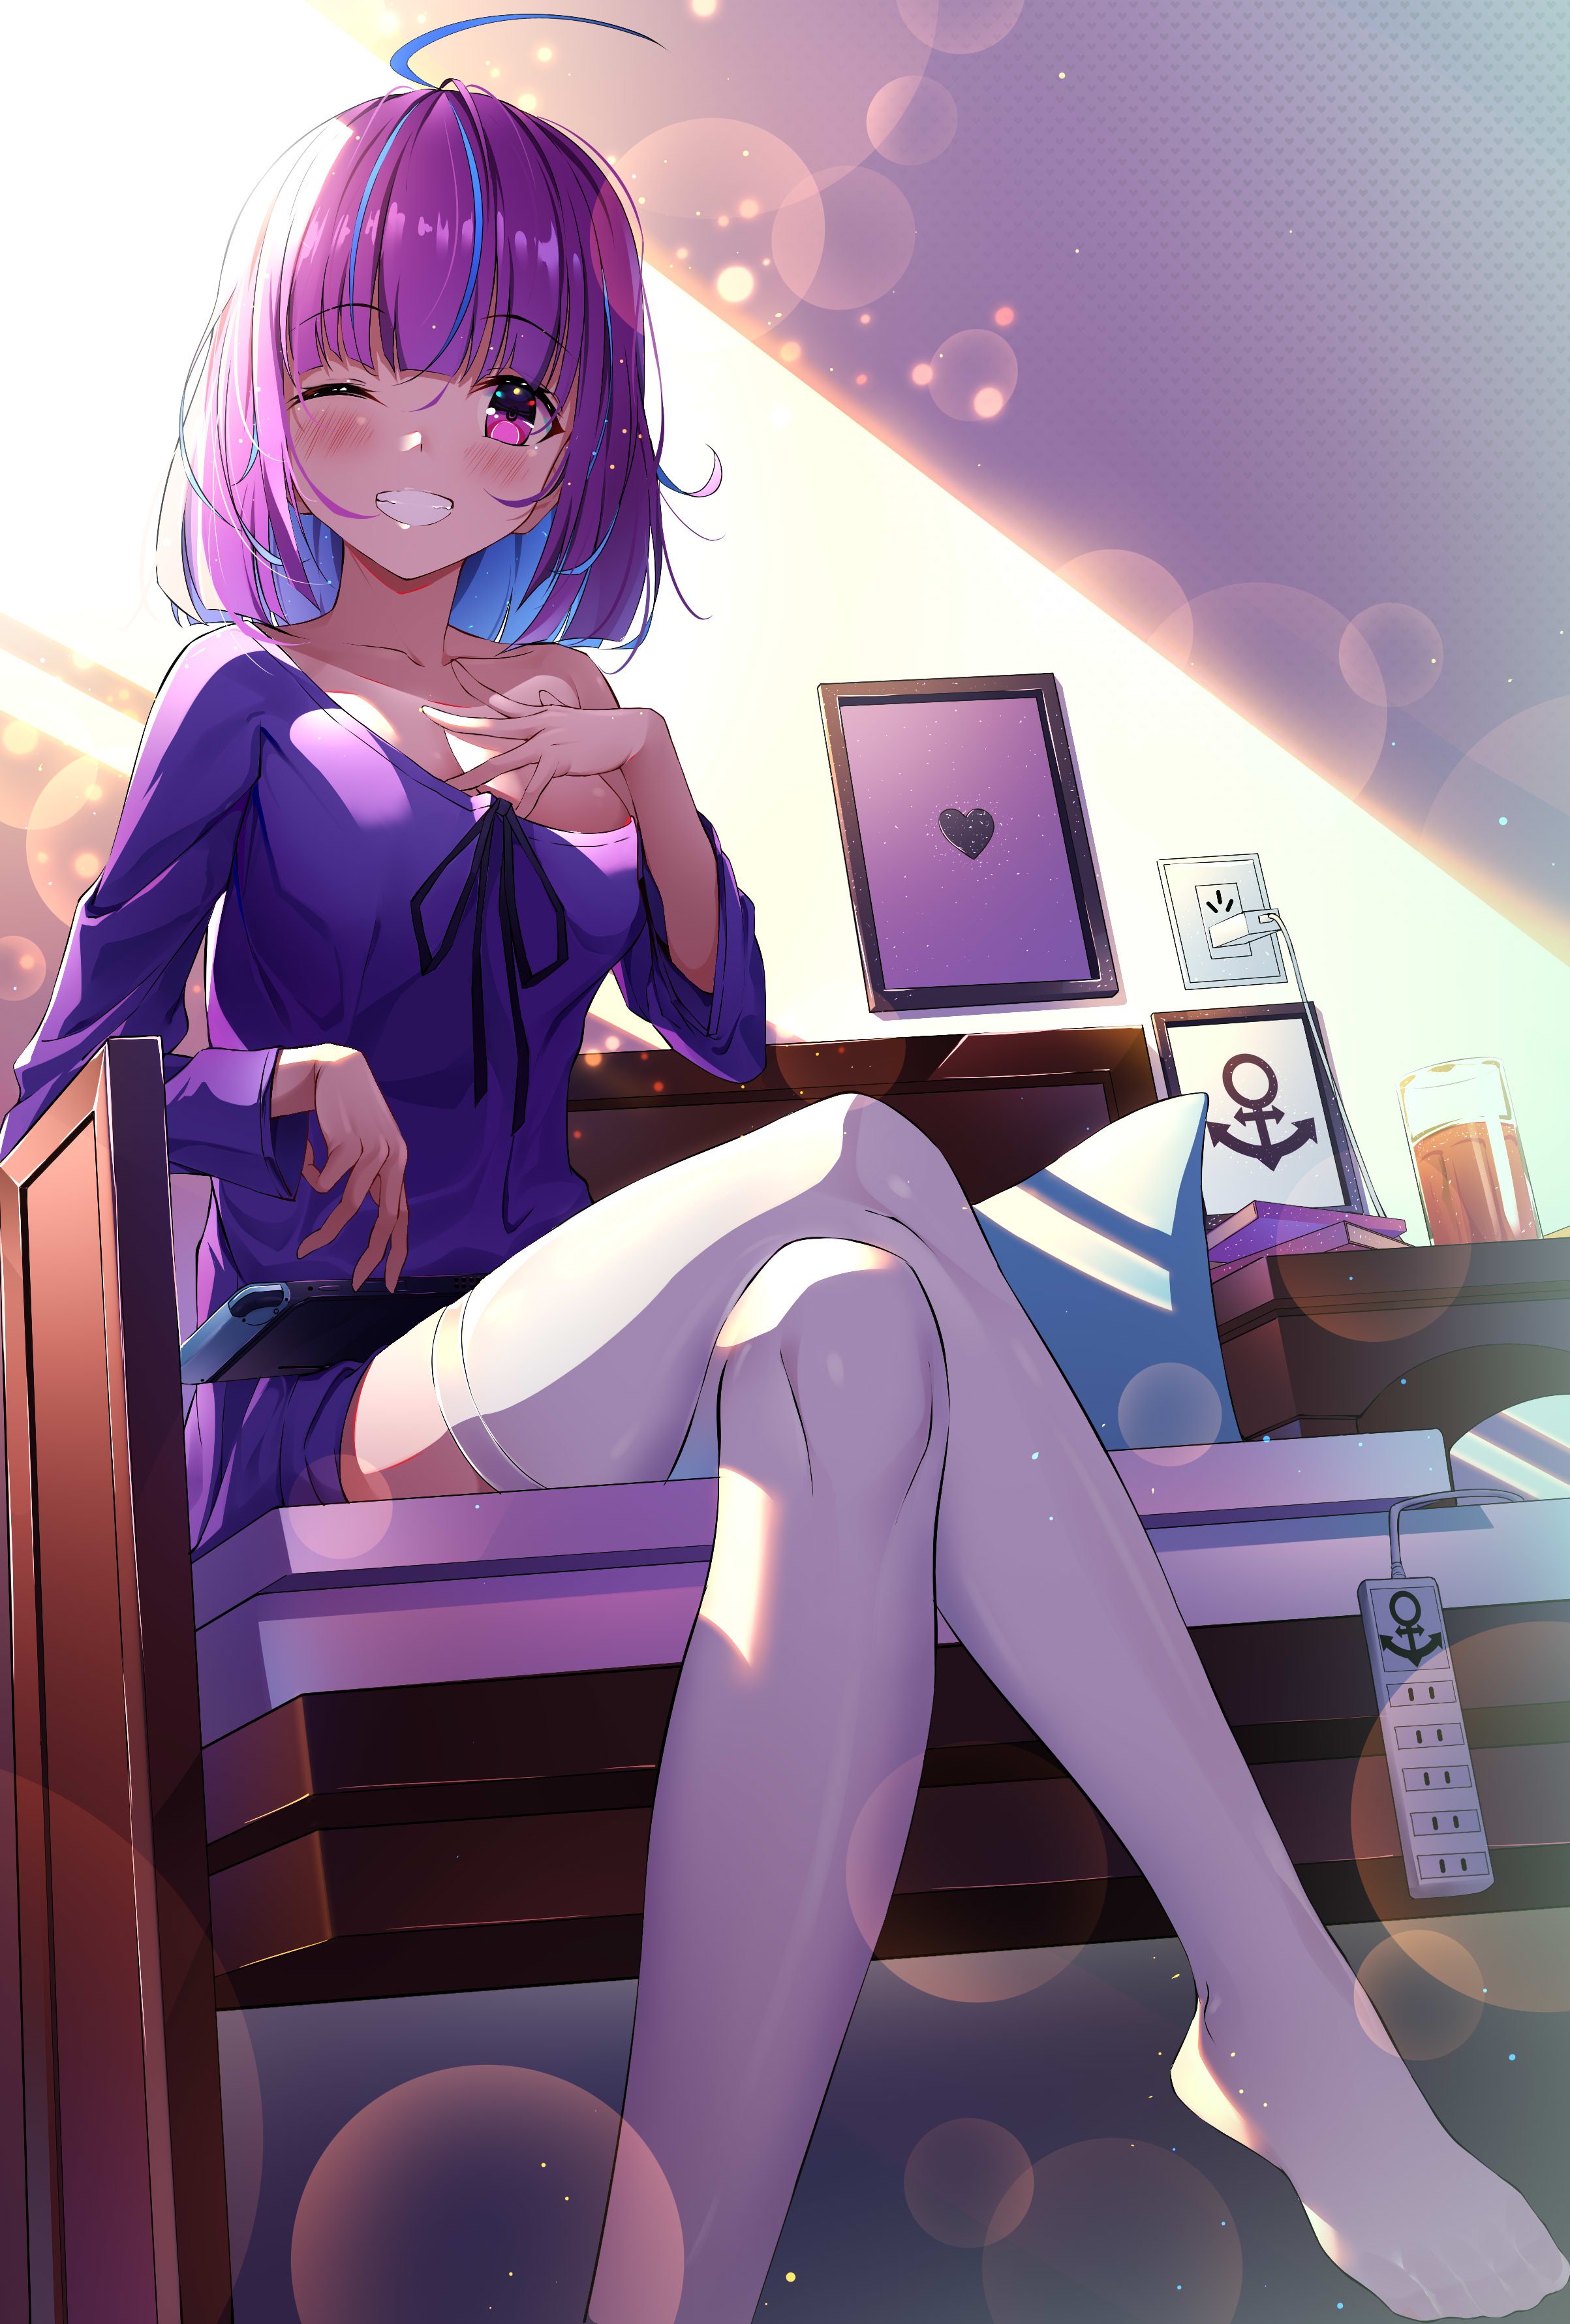 Anime 2406x3561 anime anime girls digital art artwork portrait display Hololive Virtual Youtuber Minato Aqua Cqingwei purple hair purple eyes wink smiling thigh-highs low-angle bare shoulders cleavage legs crossed sitting indoors women indoors thighs hands on chest looking at viewer